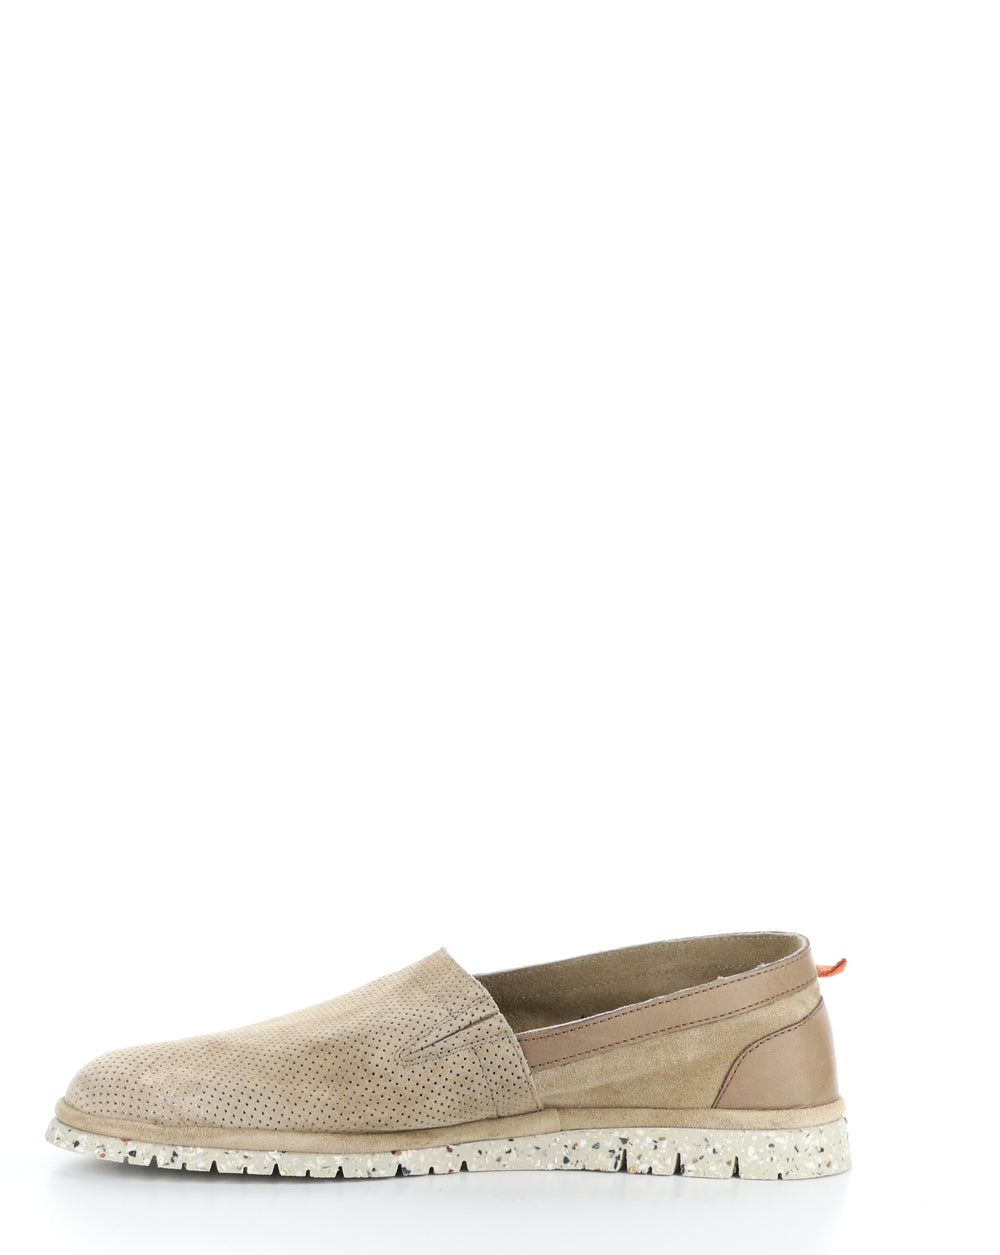 11162 SAND Round Toe Shoes